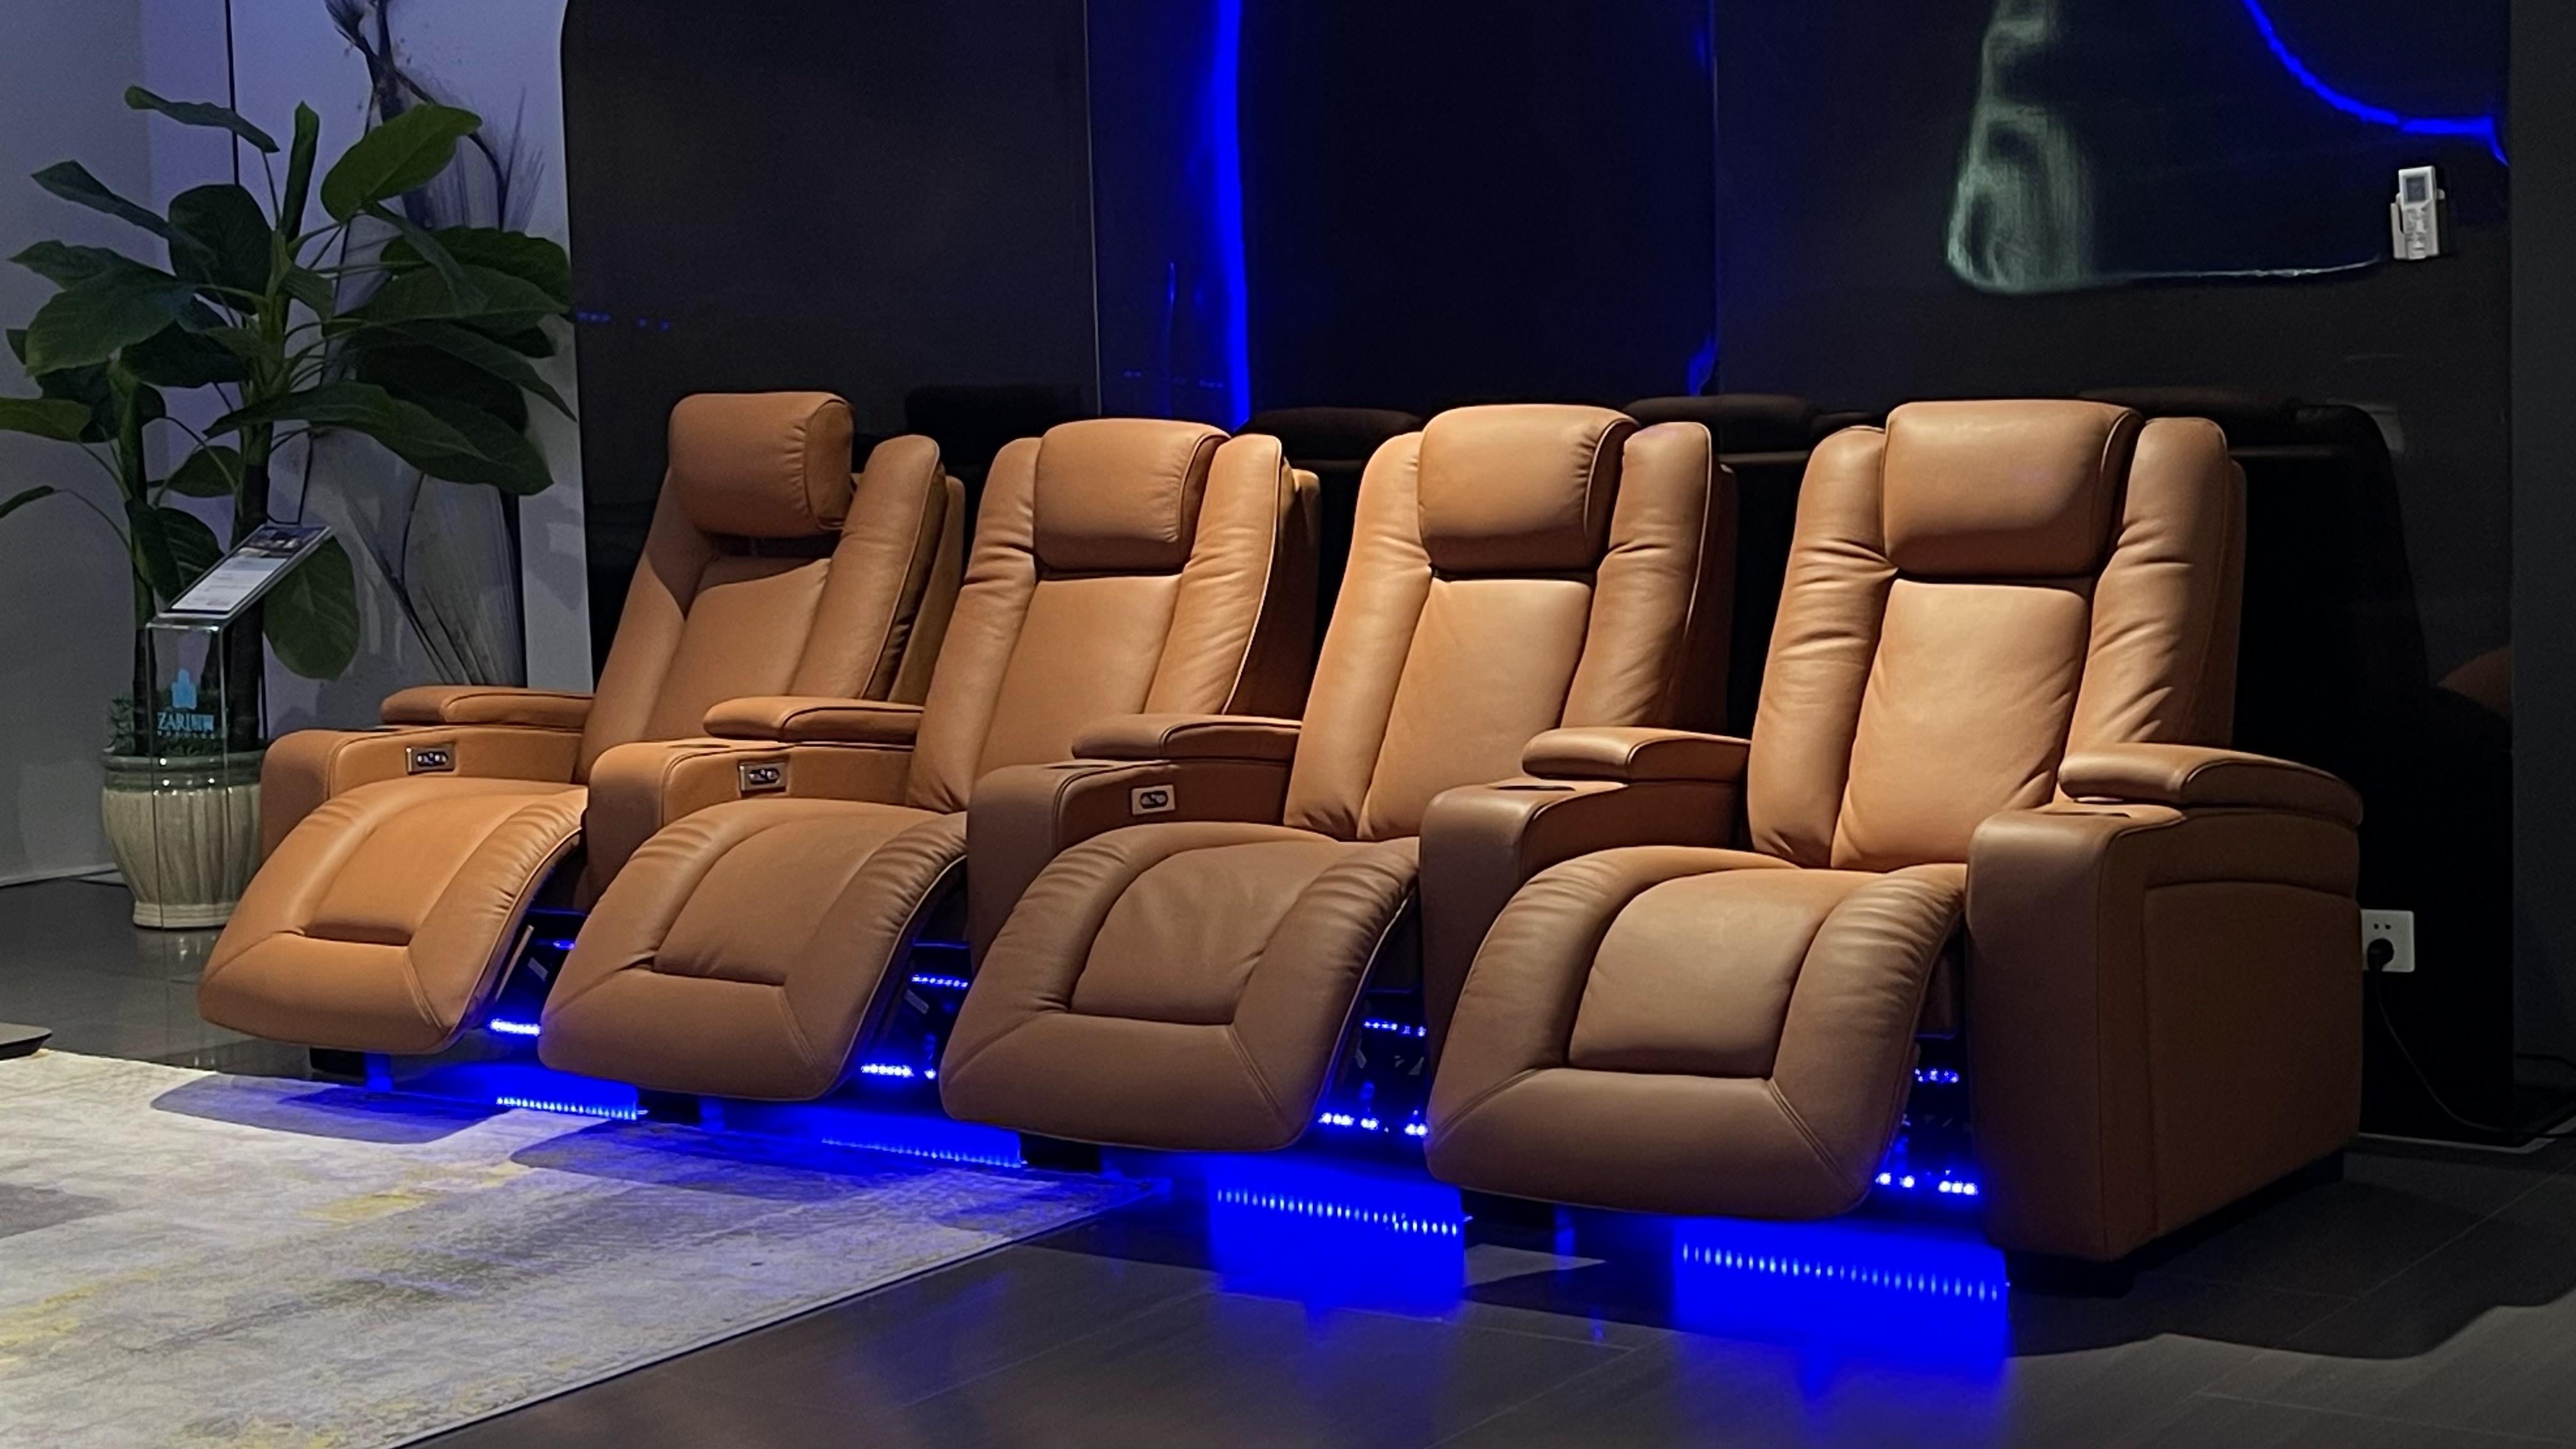 Optimizing Comfort and Space: Selecting the Perfect Sofa Size for Your Home Theater